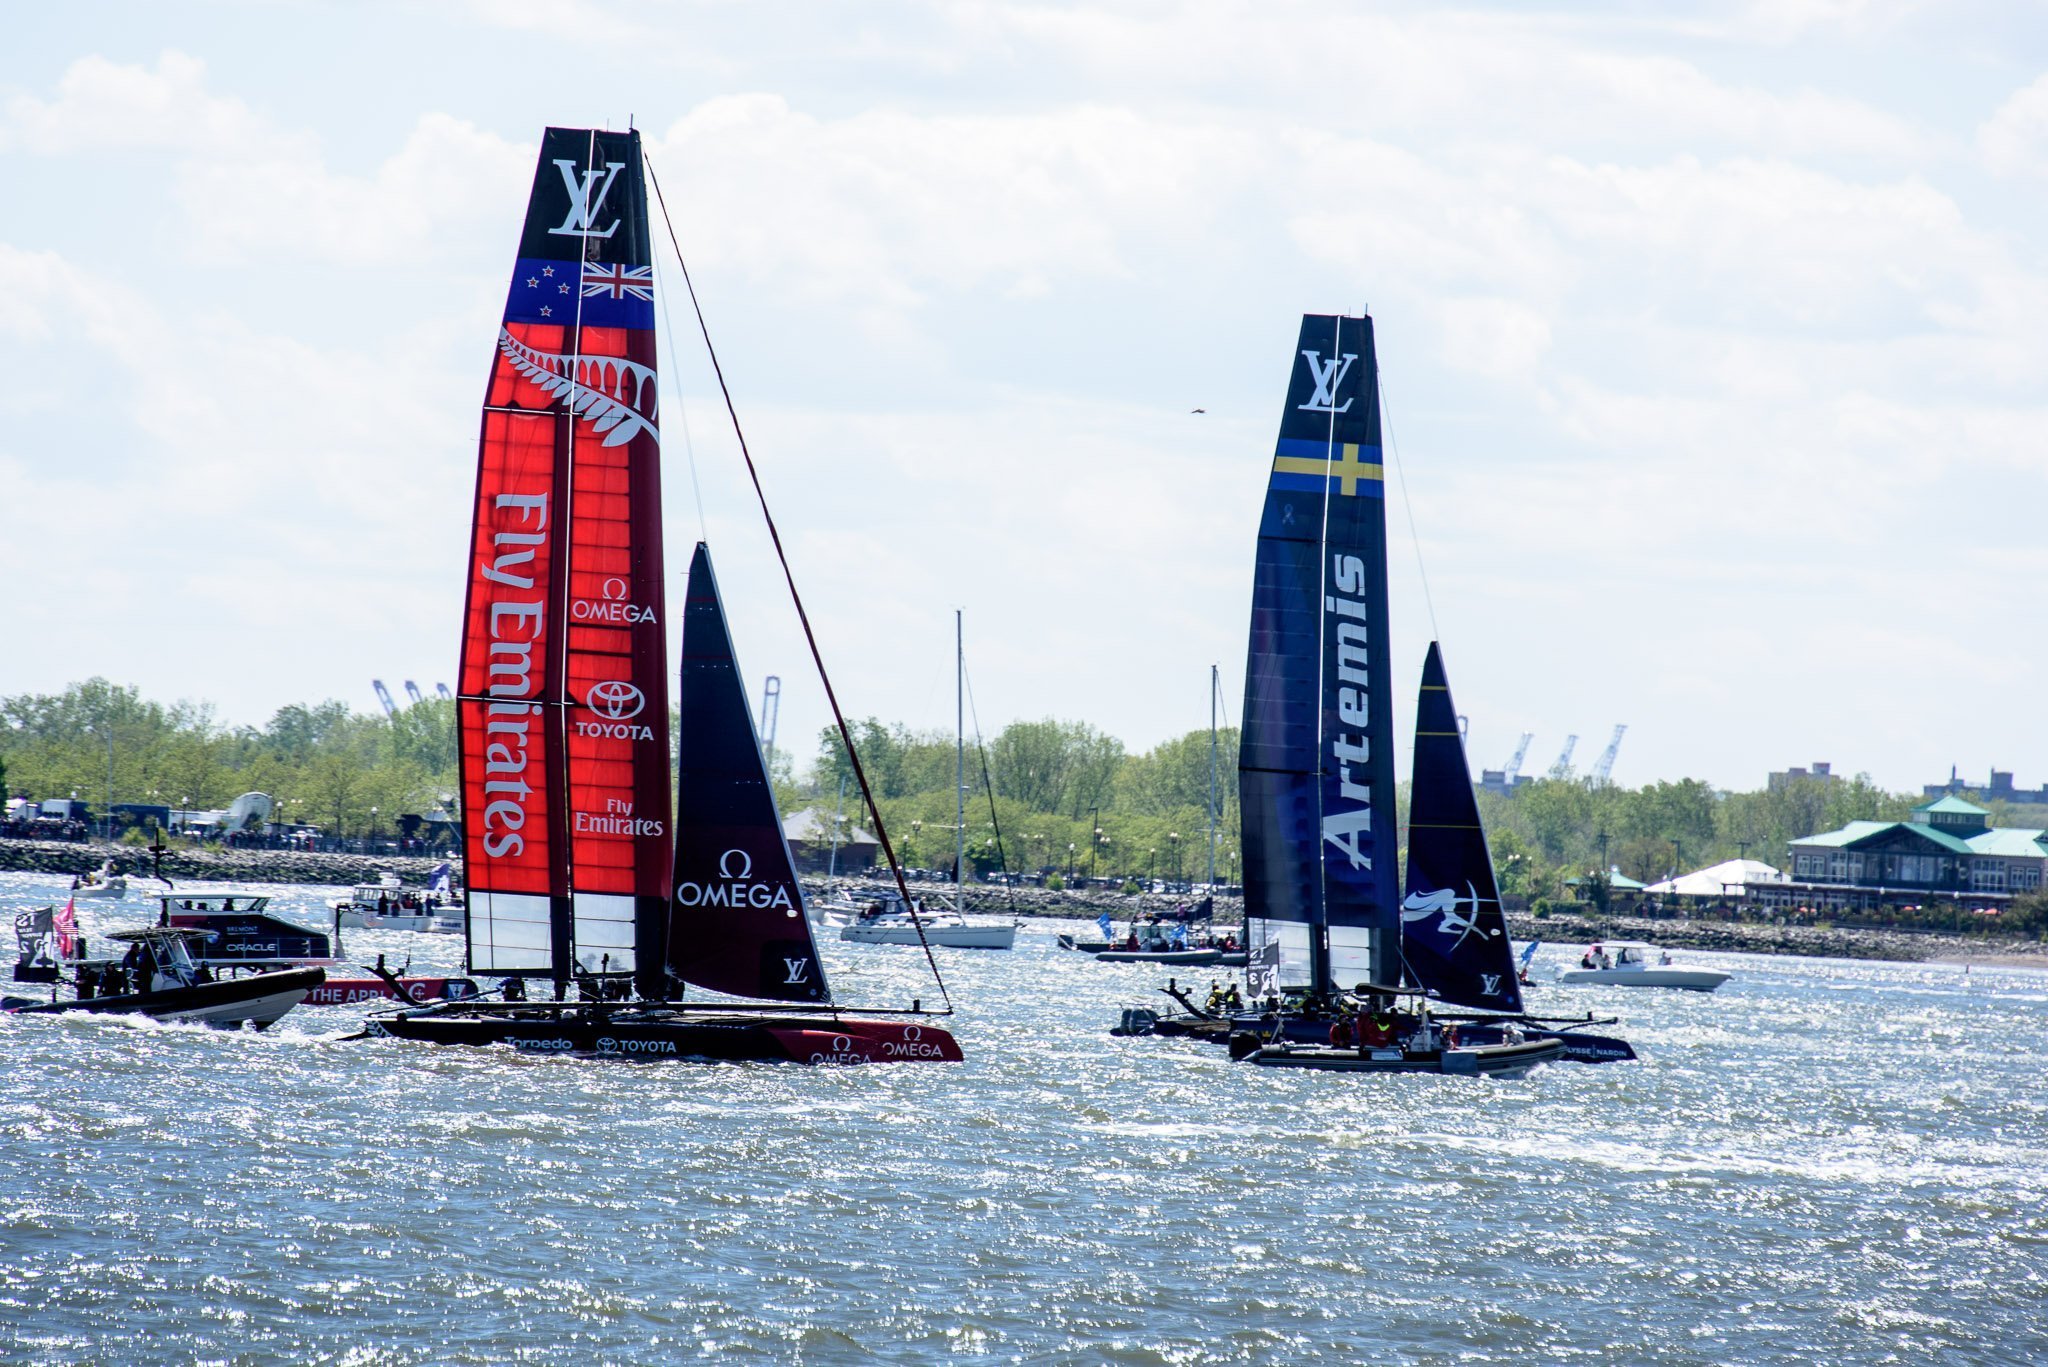 Fly Emirates and Artemis America's Cup